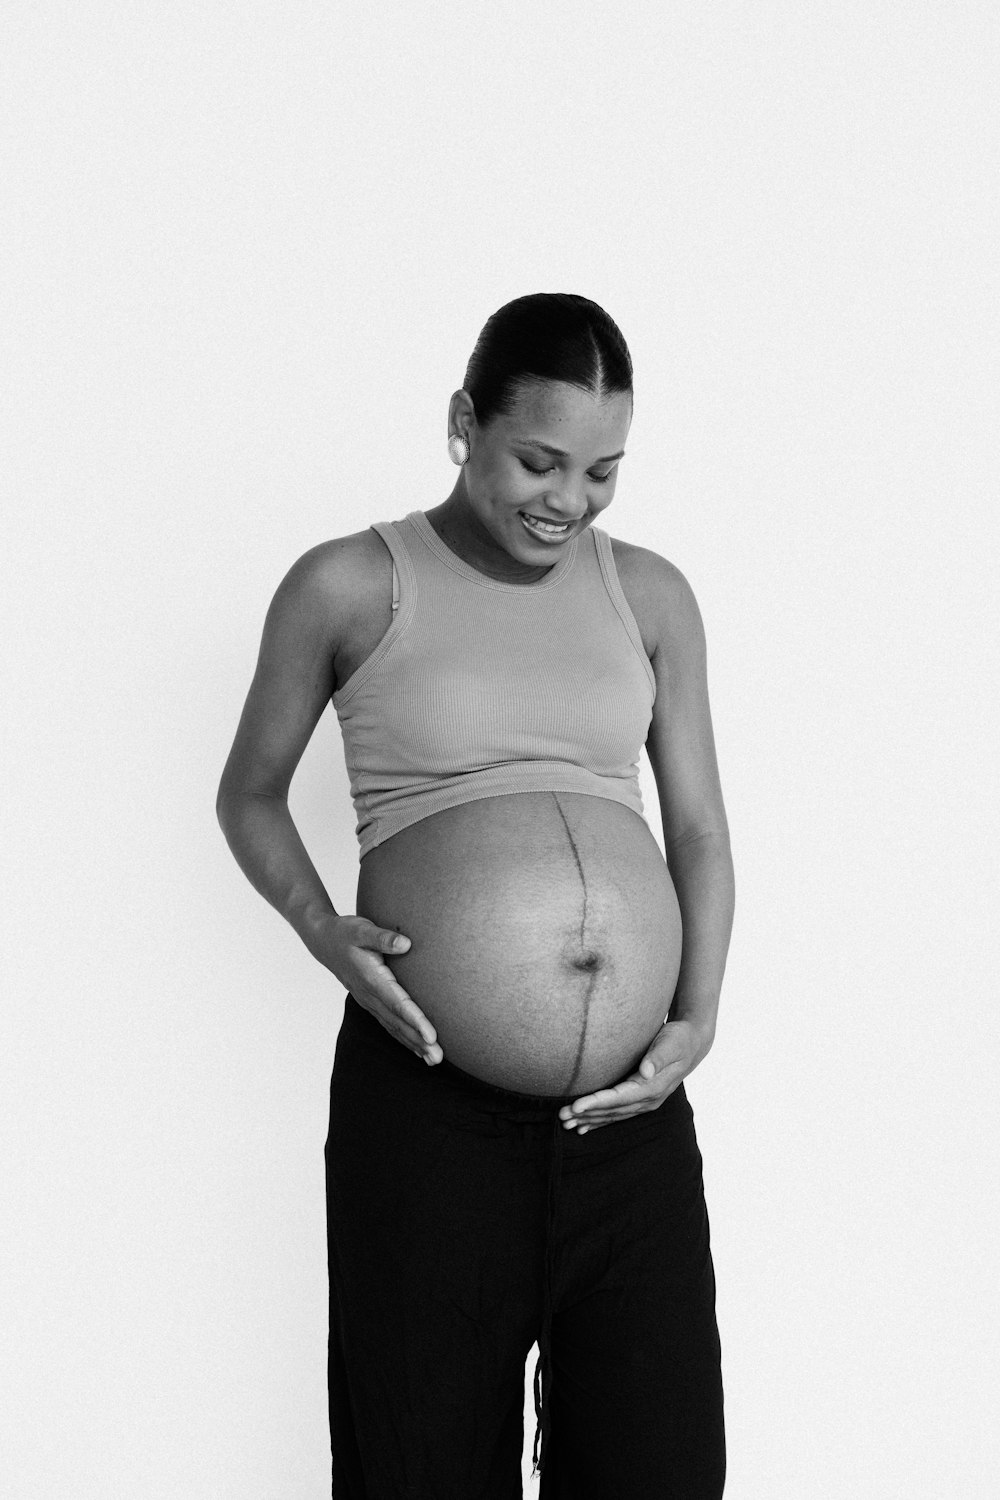 a pregnant woman holding her belly in her hands